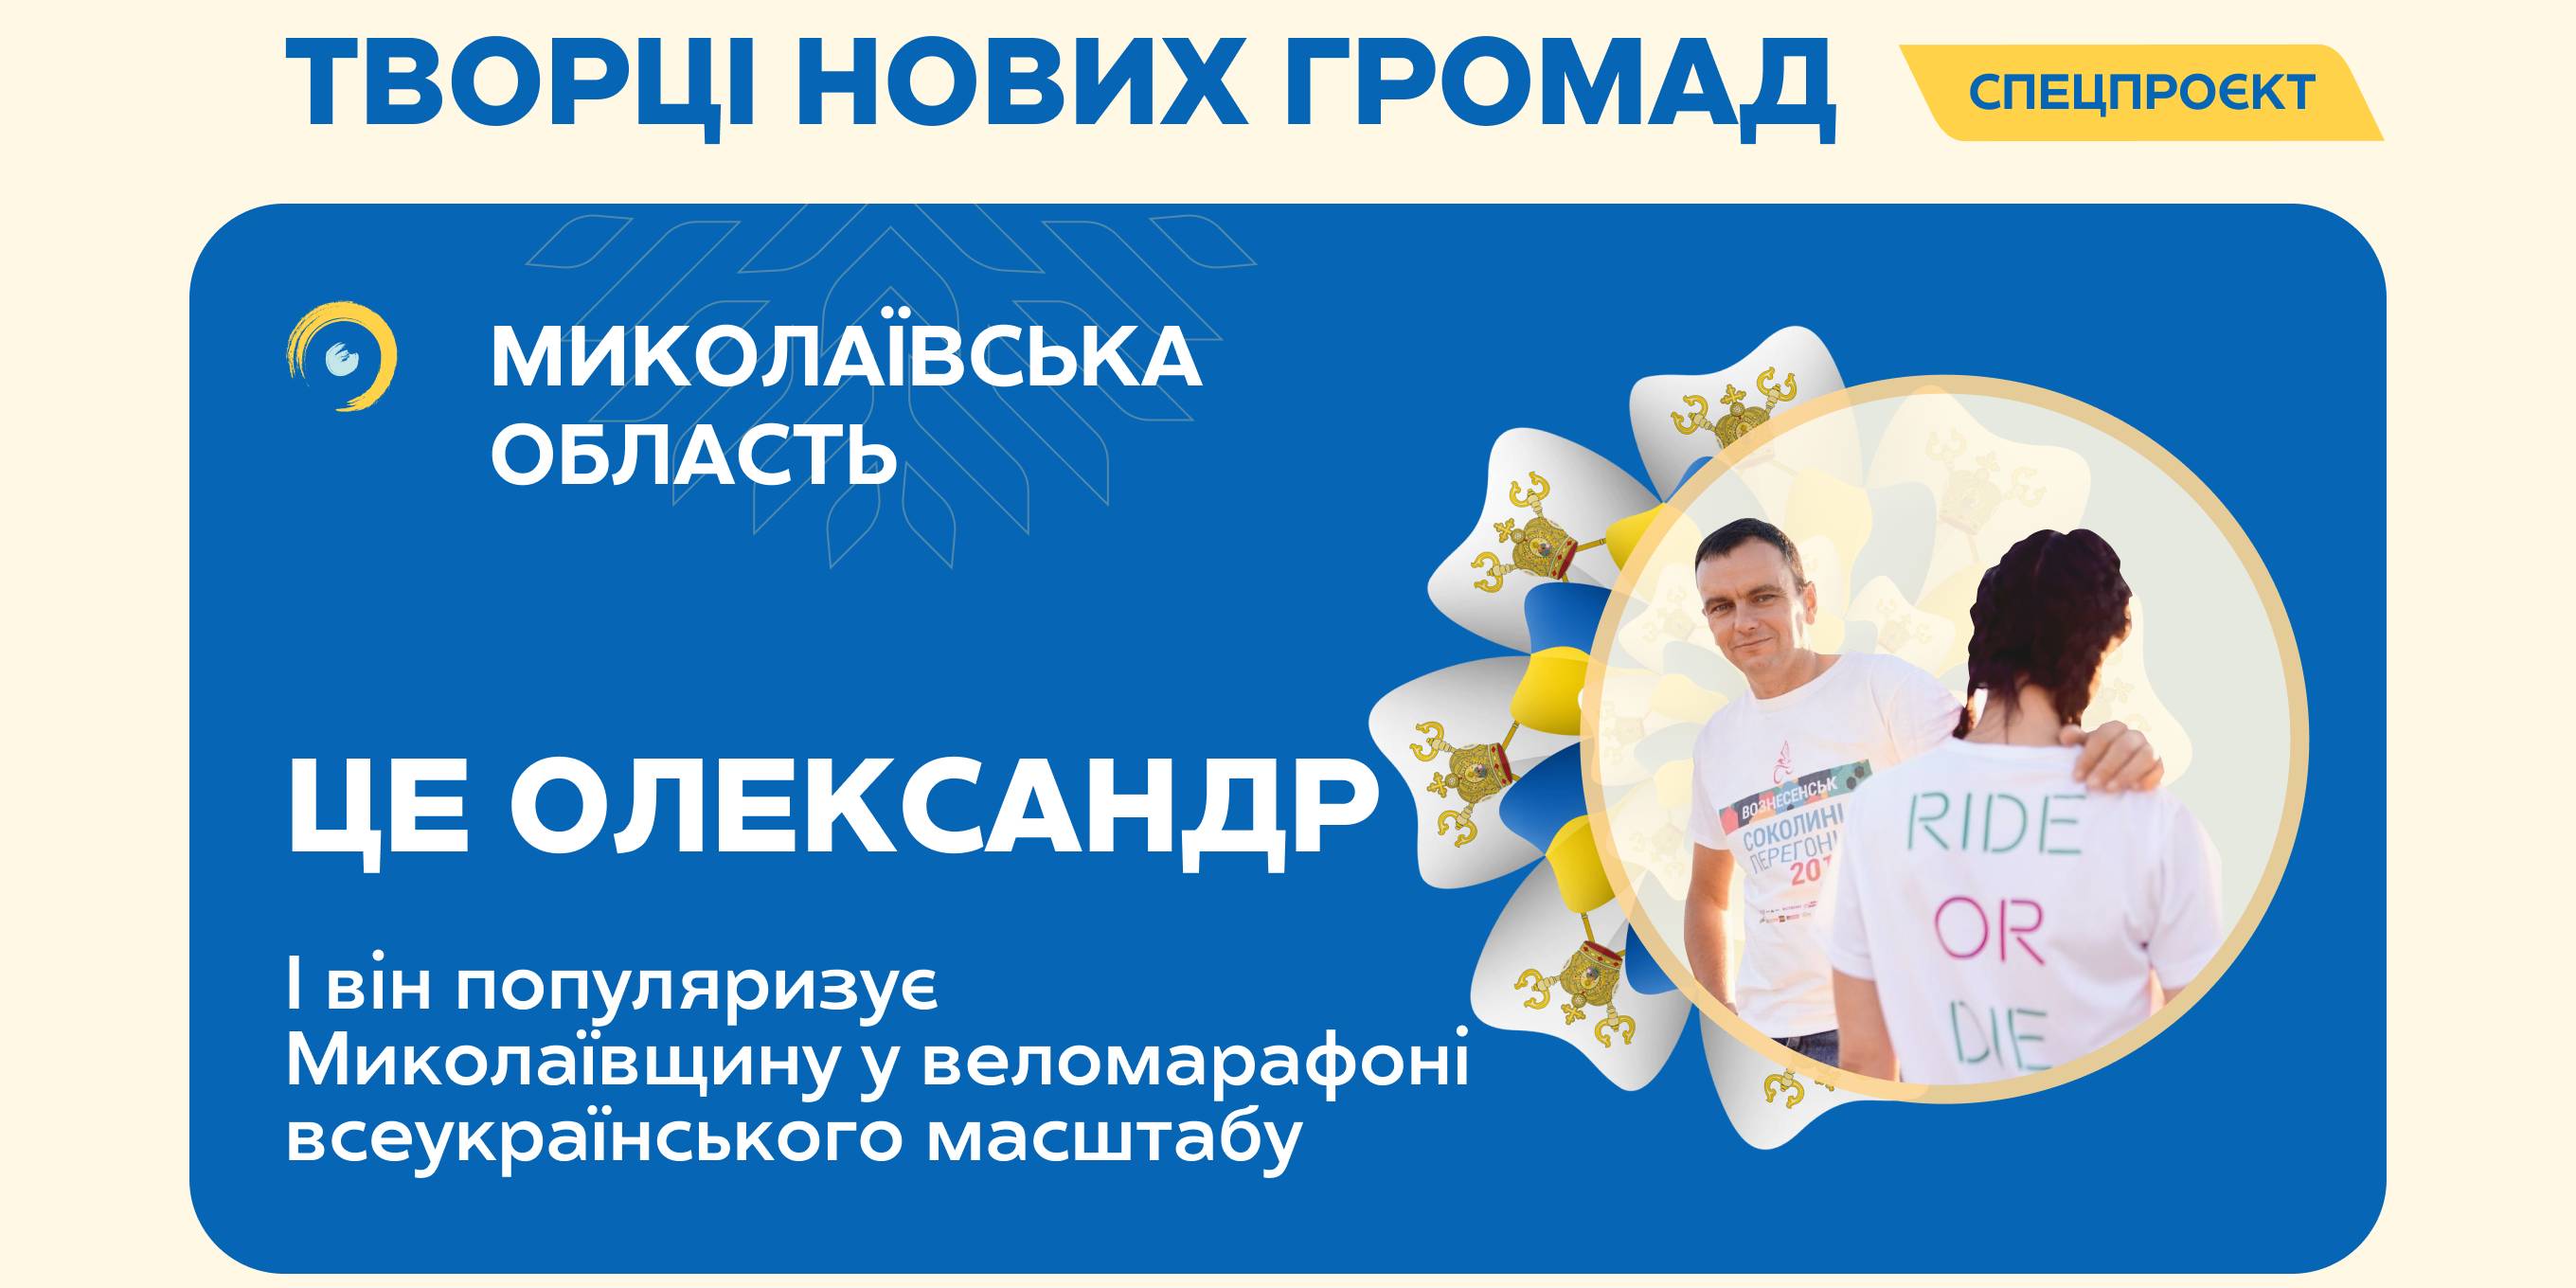 How Voznesensk residents have initiated the all-Ukrainian cycling marathon and popularize the Mykolayiv oblast via it